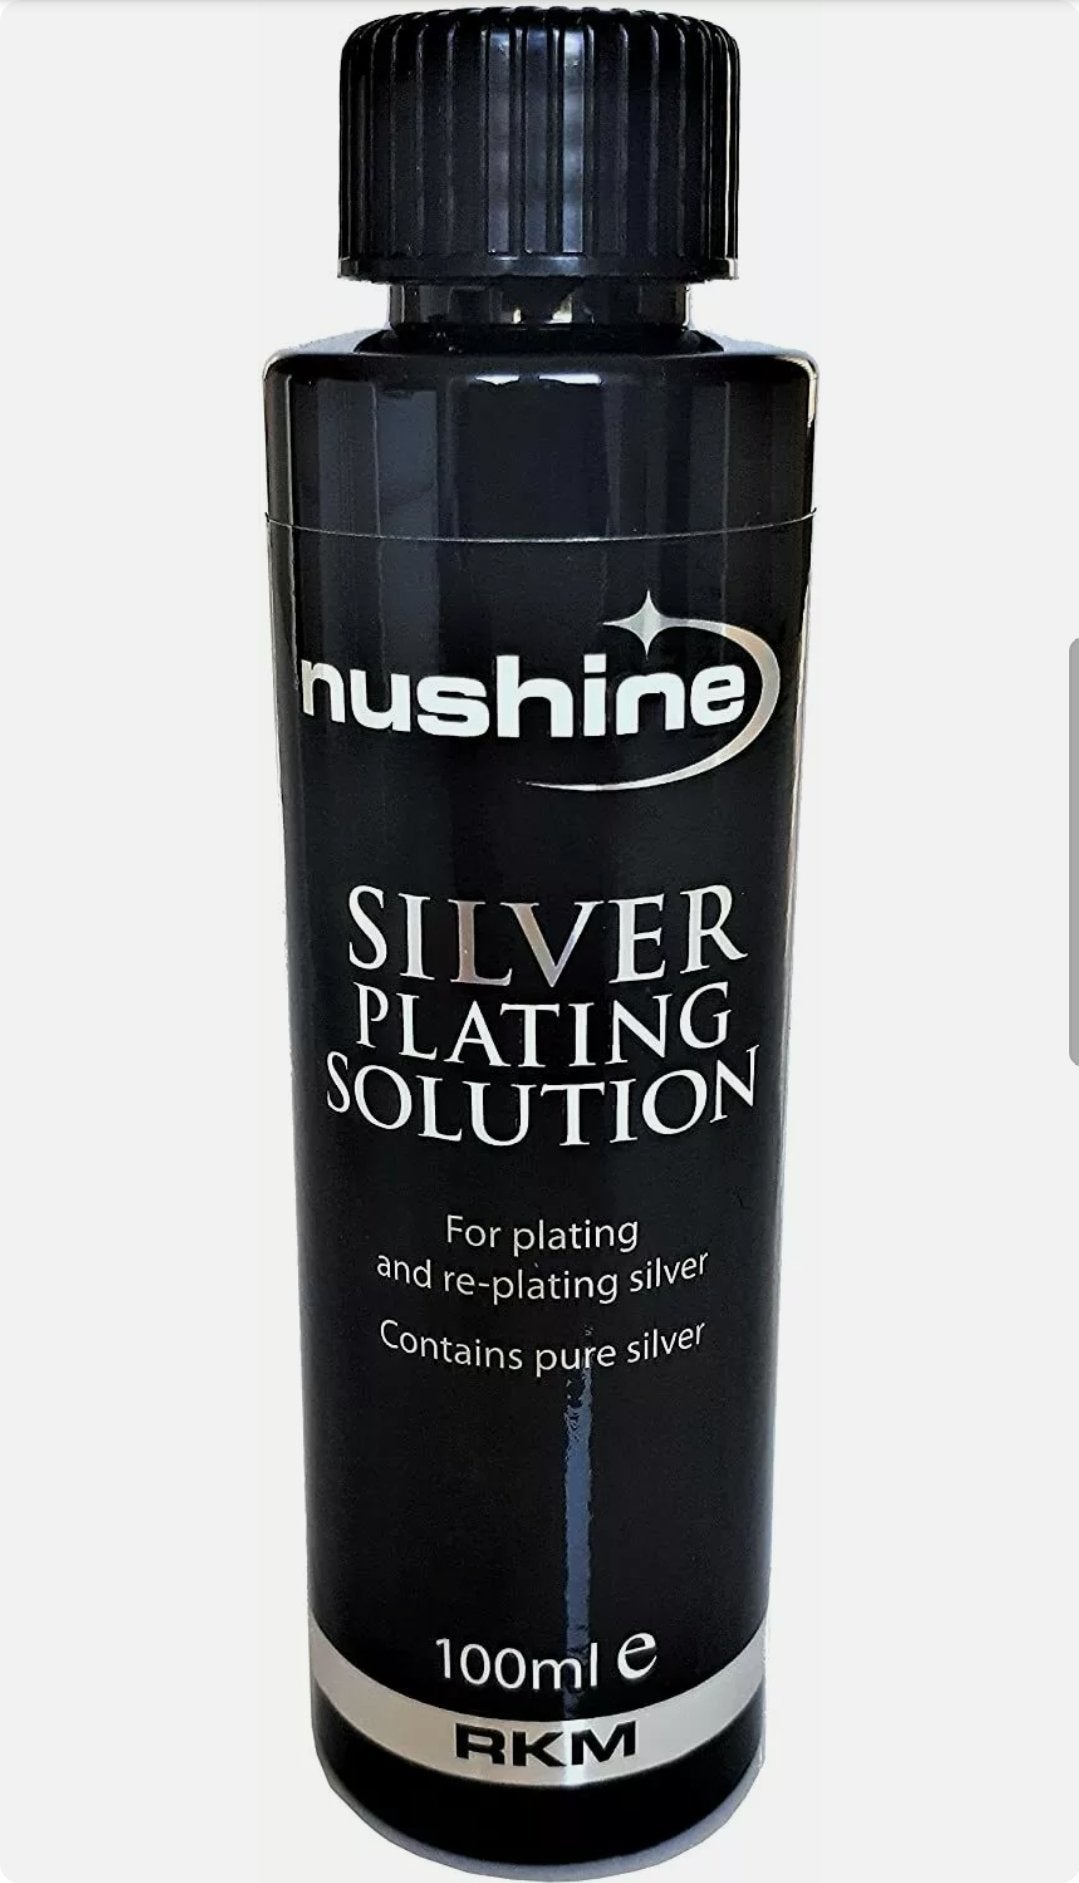 Do you trust Nushine Silver Plating Solution